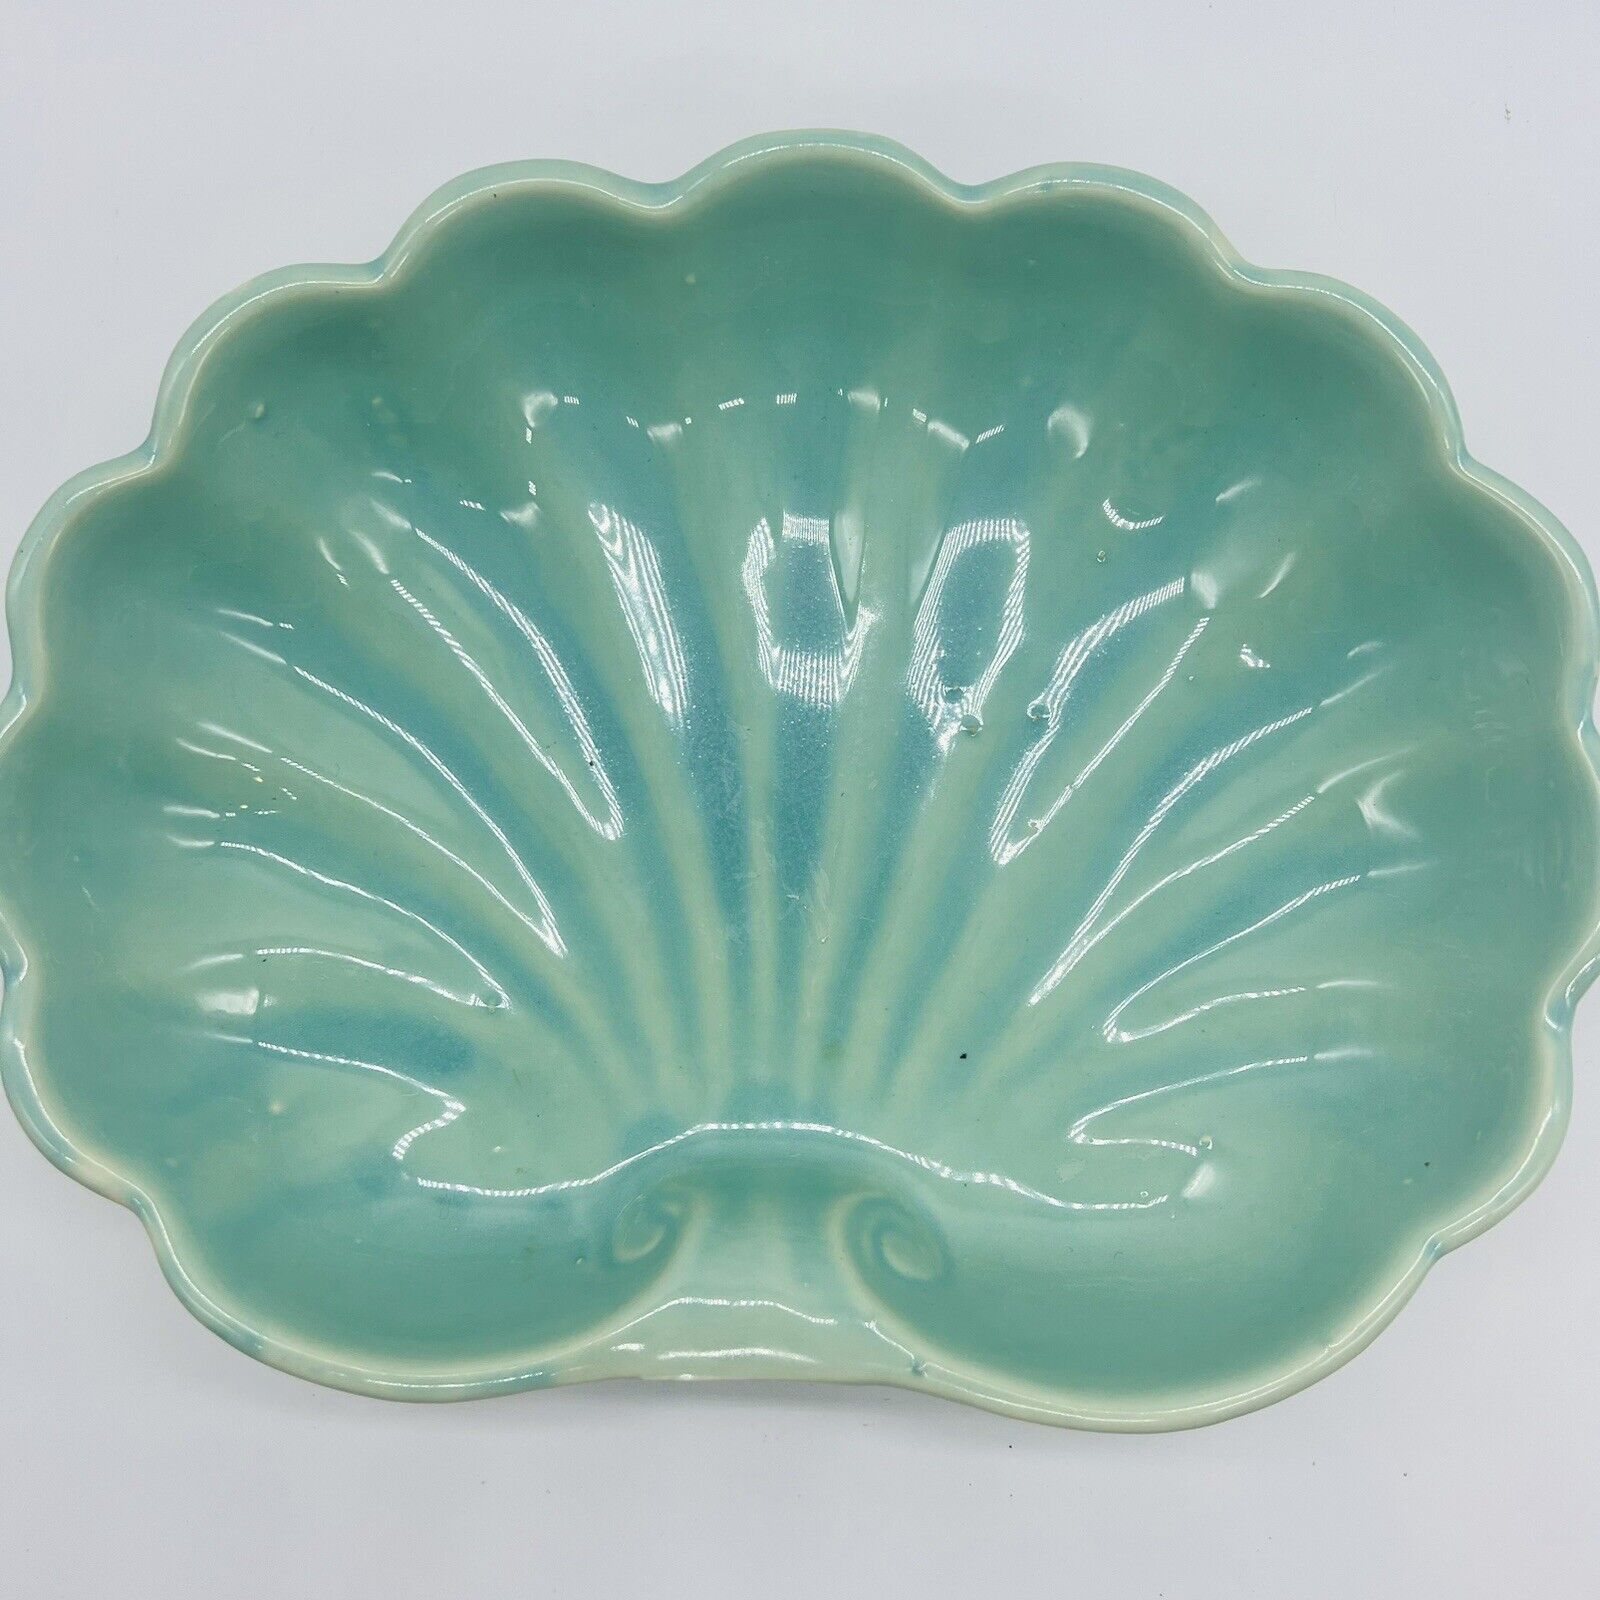 Art Deco Pottery Scallop Shell Bowl Sea Foam Green Turquoise USA Large Summer